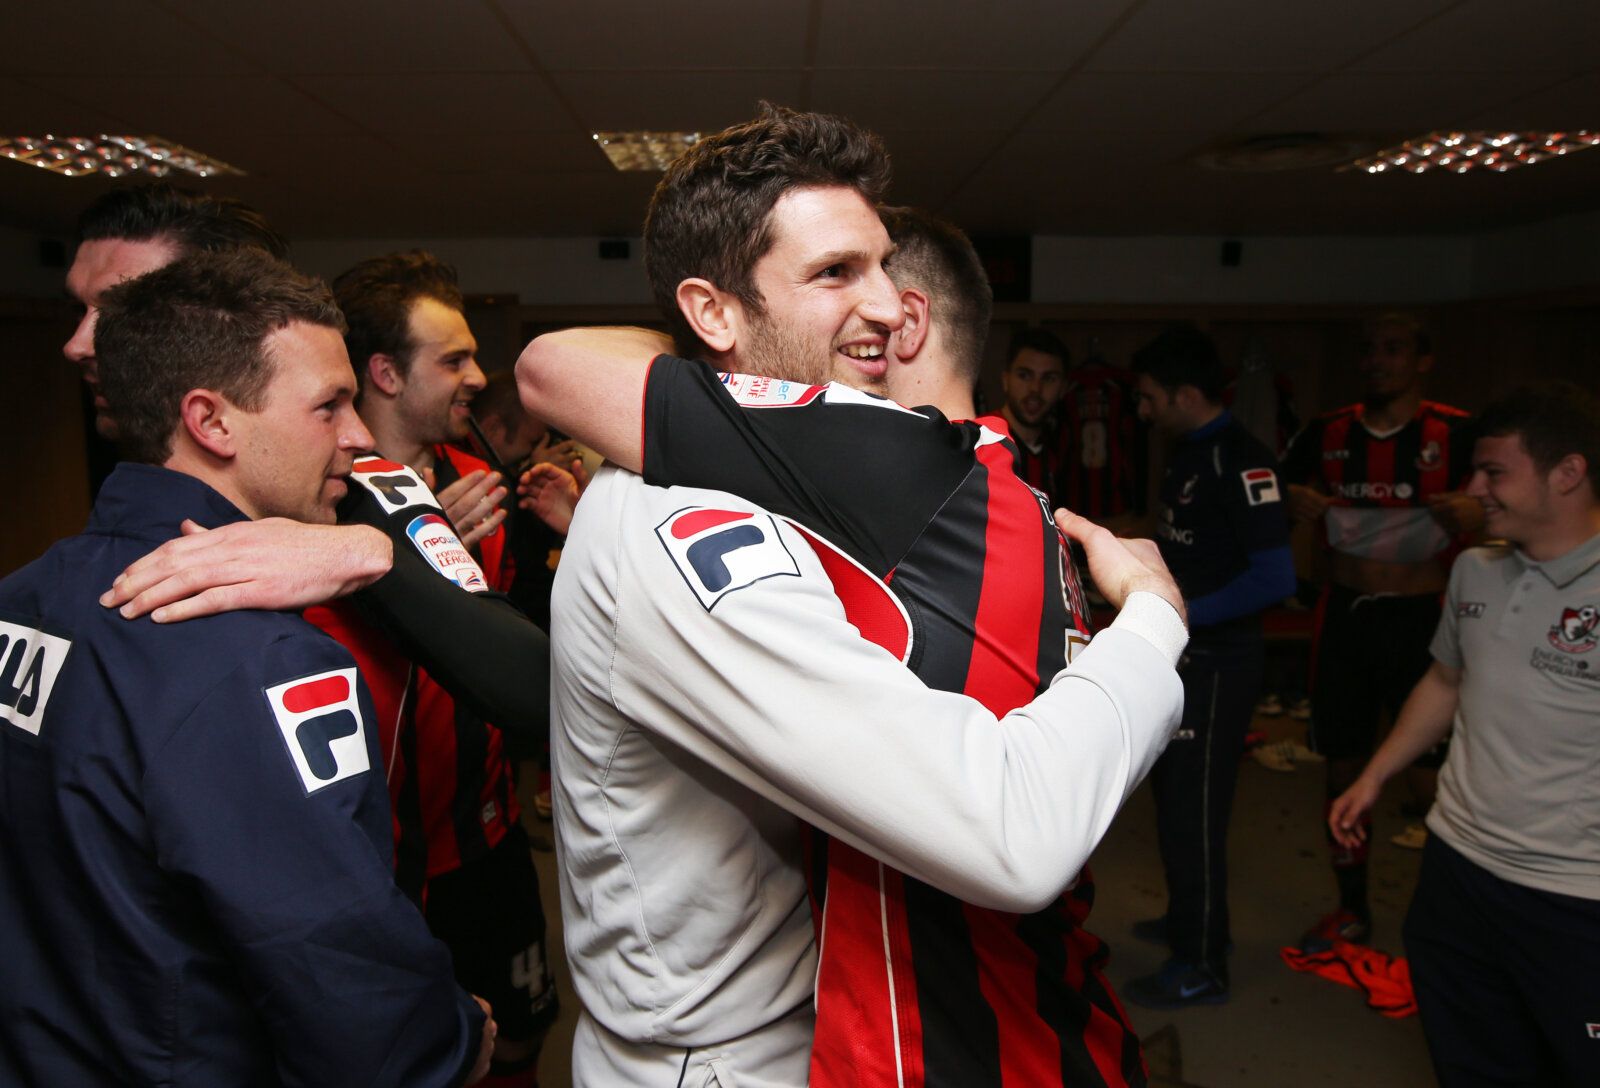 Football - AFC Bournemouth v Carlisle United - npower Football League One - Dean Court - 12/13 - 20/4/13 
AFC Bournemouth's Shwan Jalal (C) celebrates in the dressing room after winning promotion 
Mandatory Credit: Action Images / Paul Childs 
EDITORIAL USE ONLY. No use with unauthorized audio, video, data, fixture lists, club/league logos or live services. Online in-match use limited to 45 images, no video emulation. No use in betting, games or single club/league/player publications.  Please co